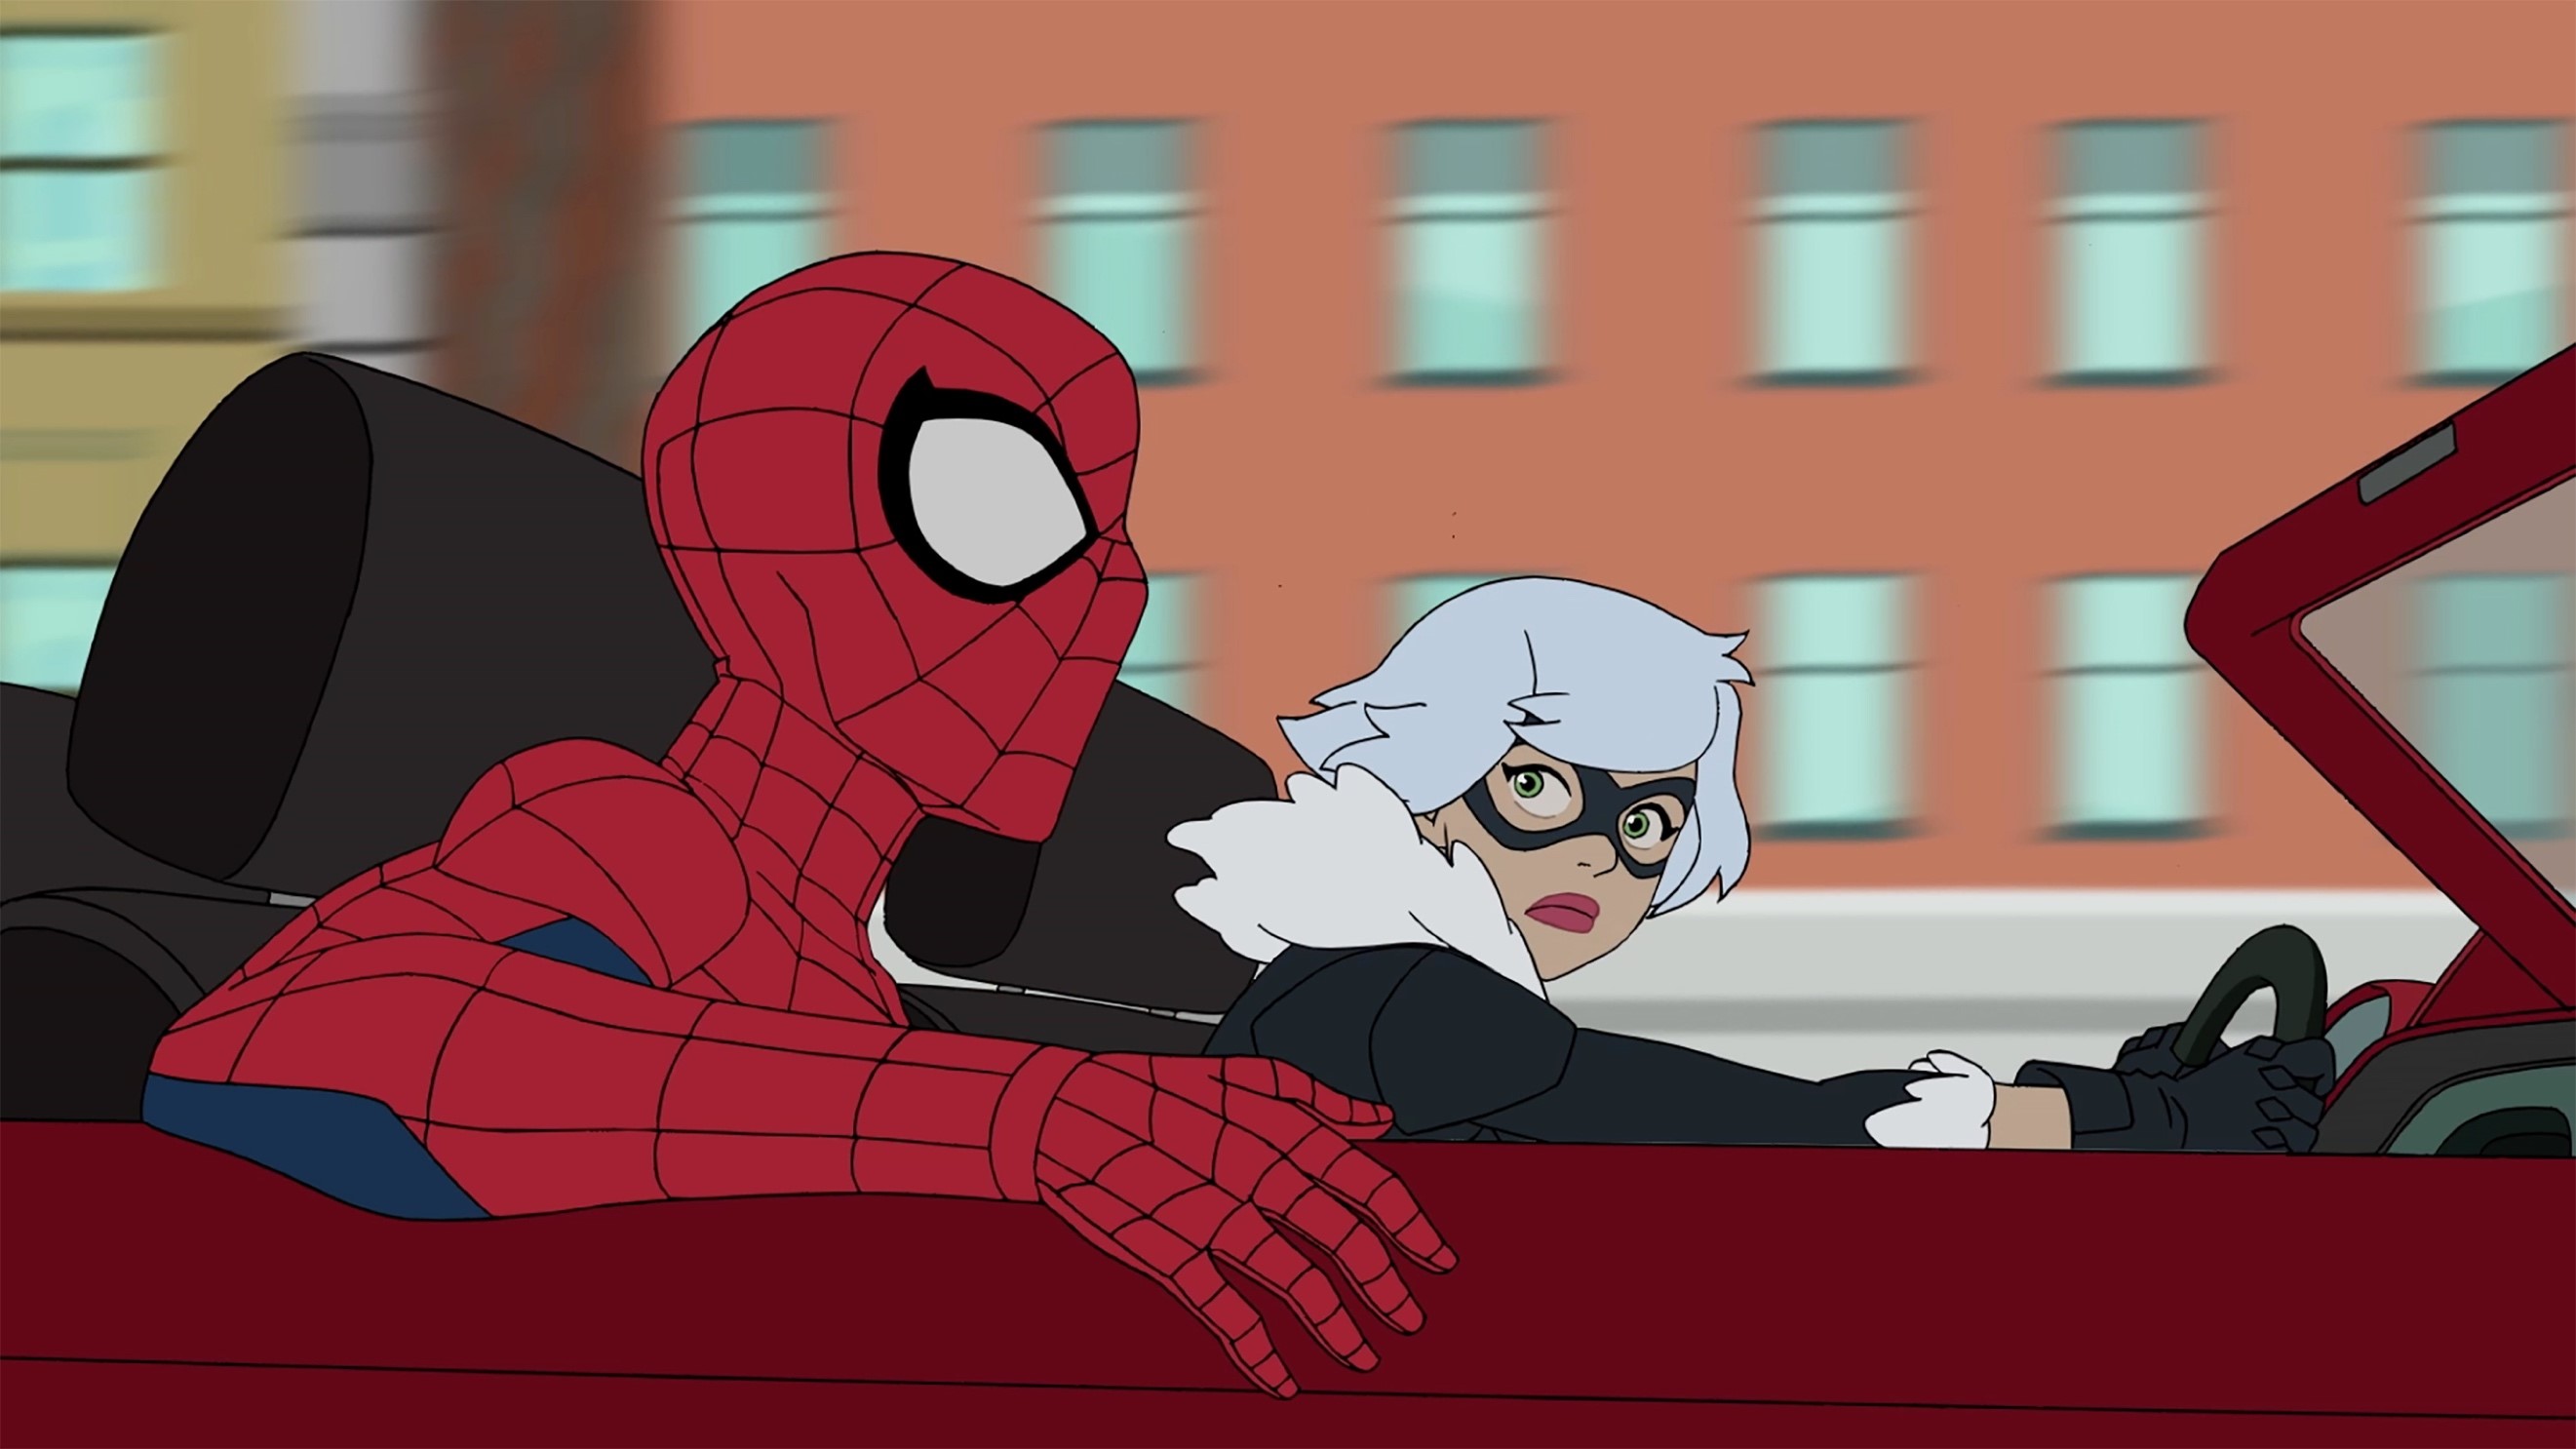 There's a new 'Spider-Man' cartoon series coming to Disney Channel